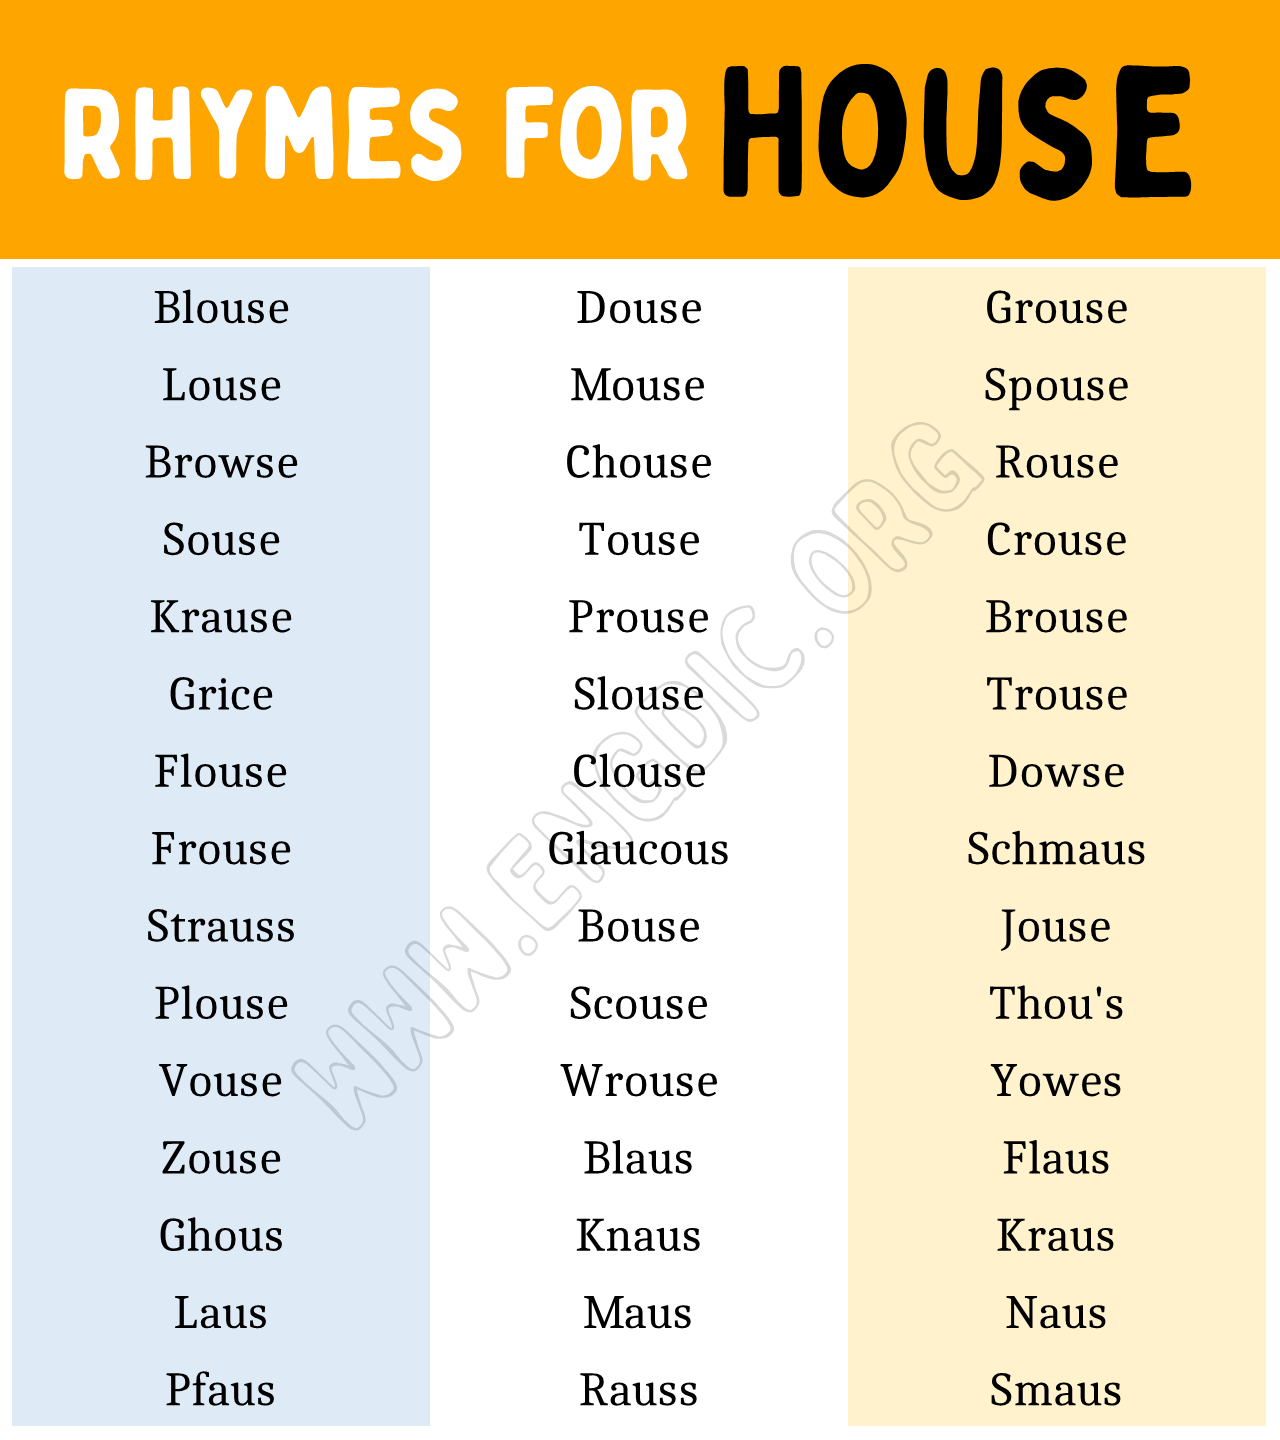 Words That Rhyme With House